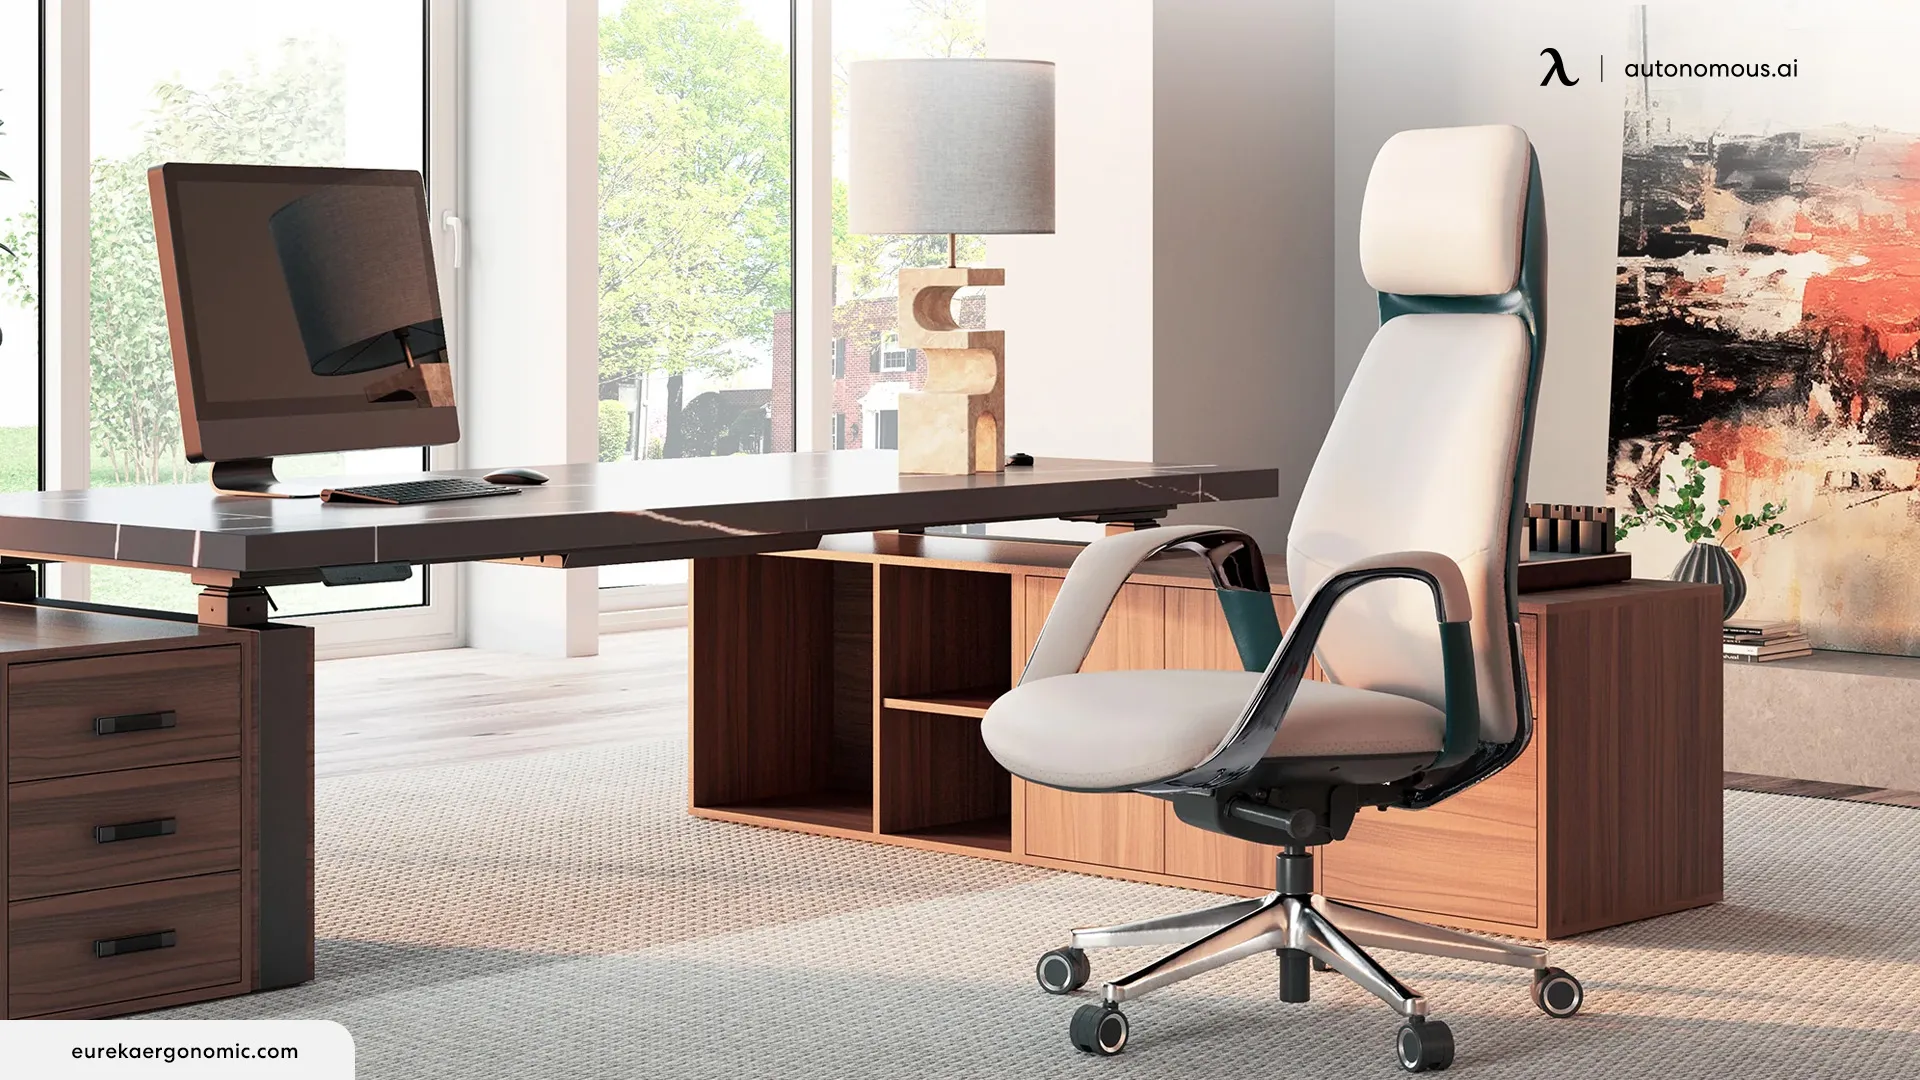 Why Should You Get a Genuine Leather Office Desk Chair?